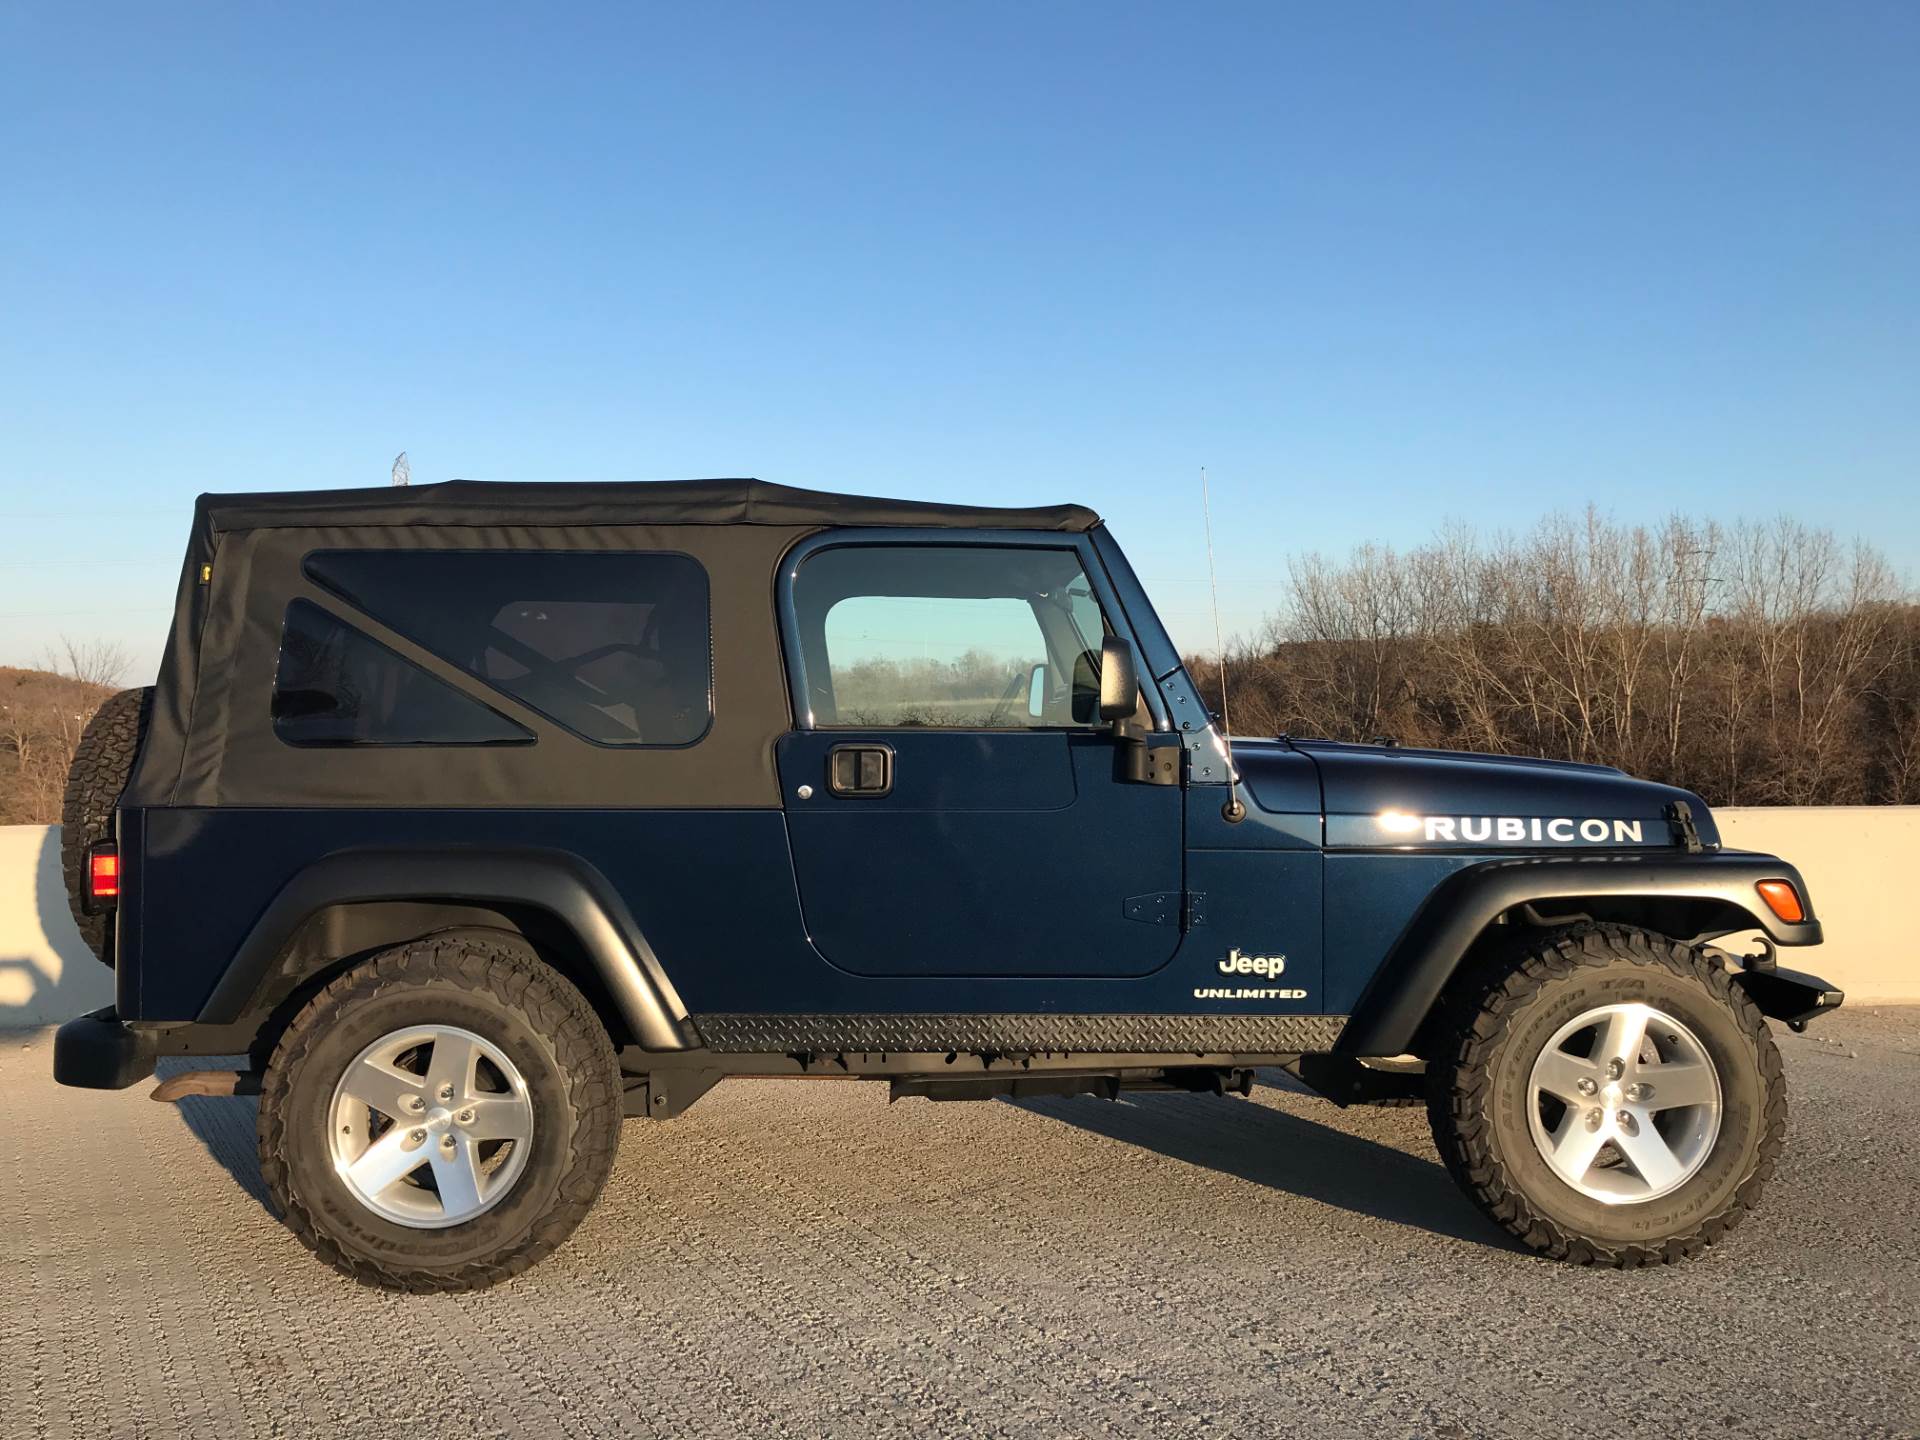 2006 Jeep Wrangler Unlimited Rubicon 2dr SUV 4WD in Big Bend, Wisconsin - Photo 103